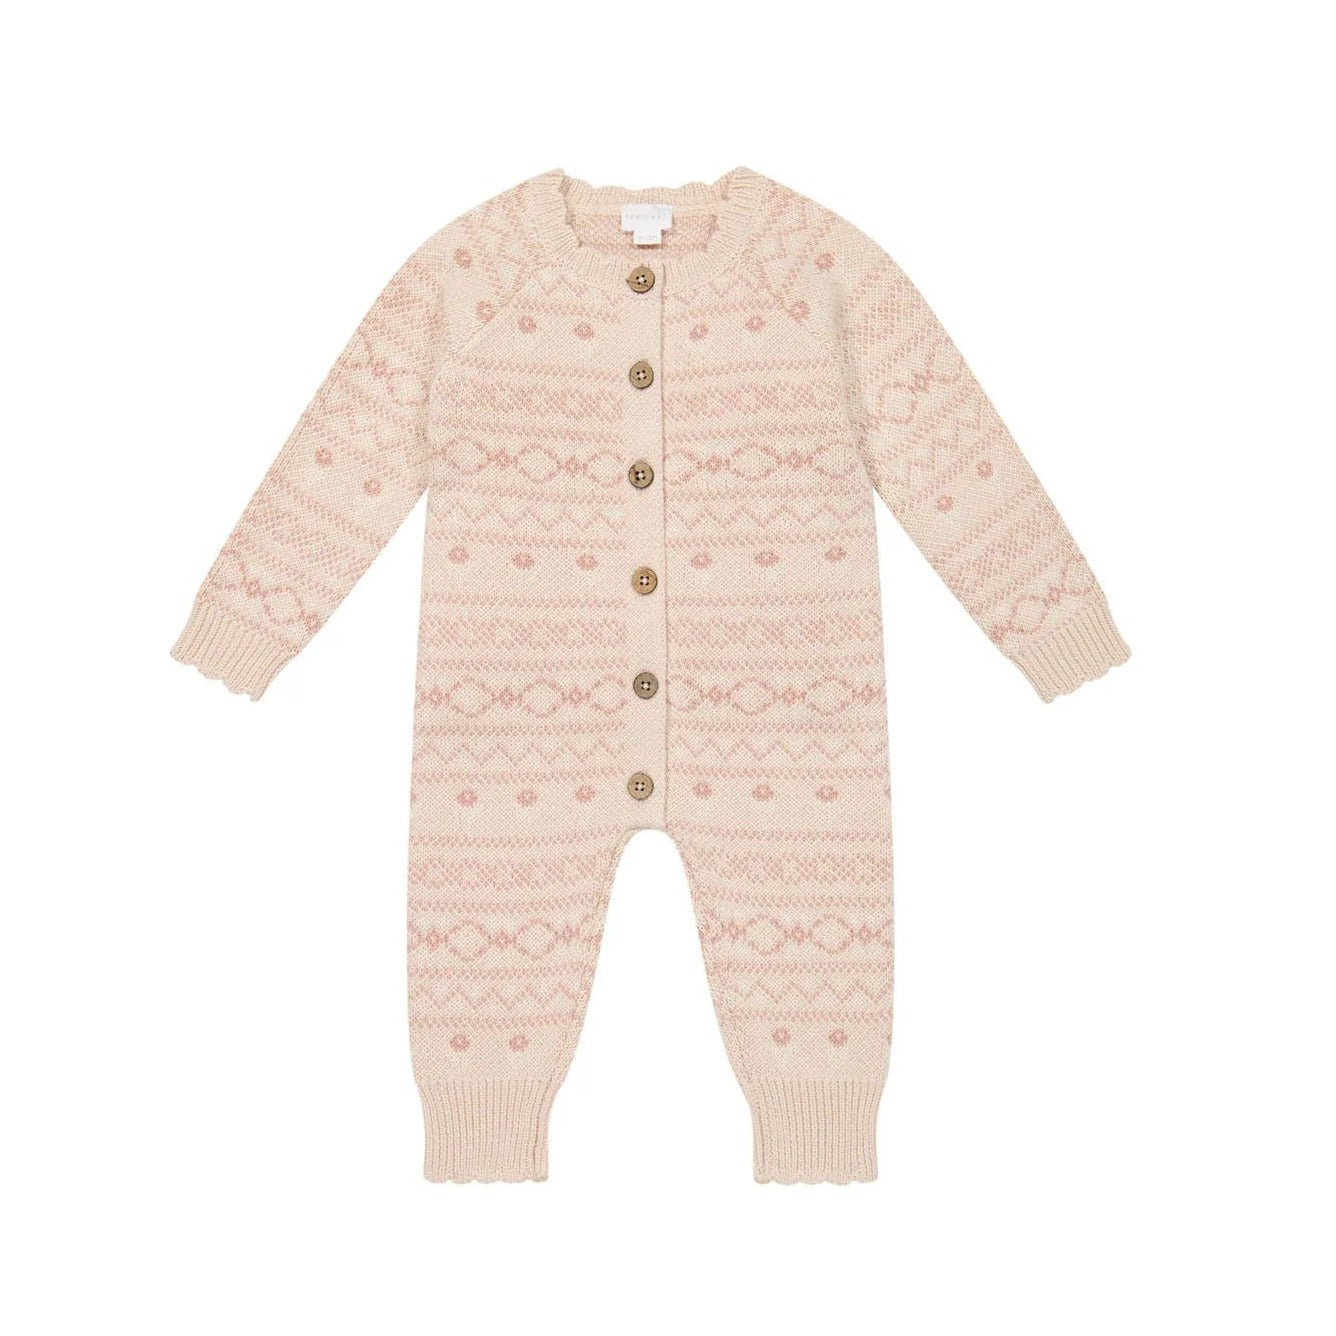 jamie kay knit romper - angus and dudley